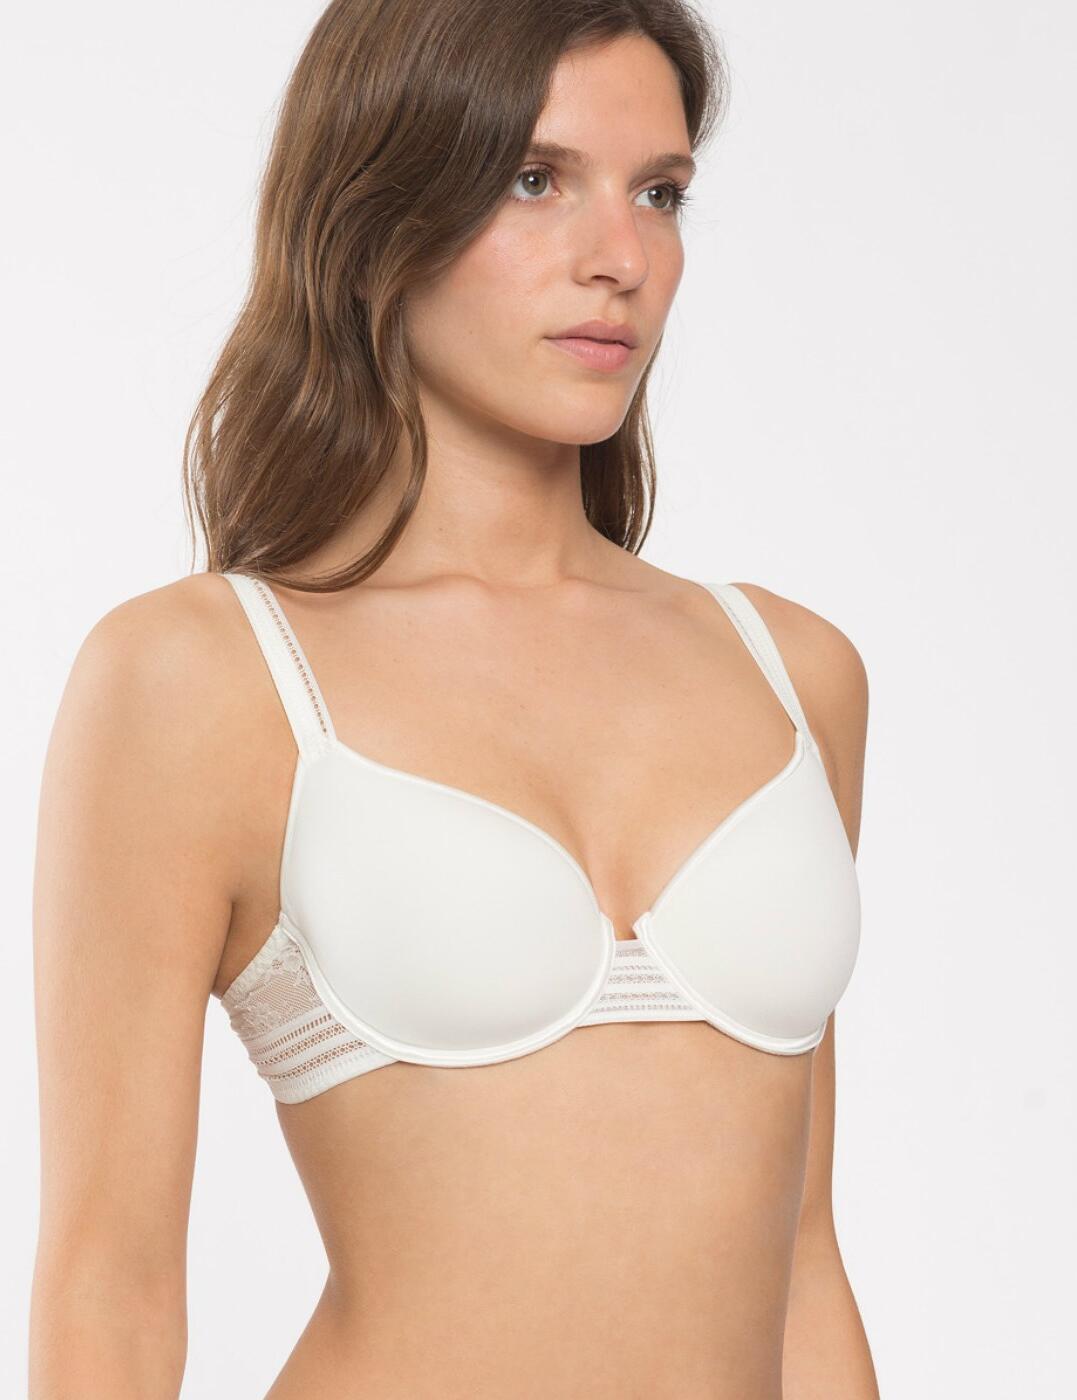 Details about   Maison Lejaby Miss Lejaby Spacer Bra 16432 New Womens Moulded Underwired Bras